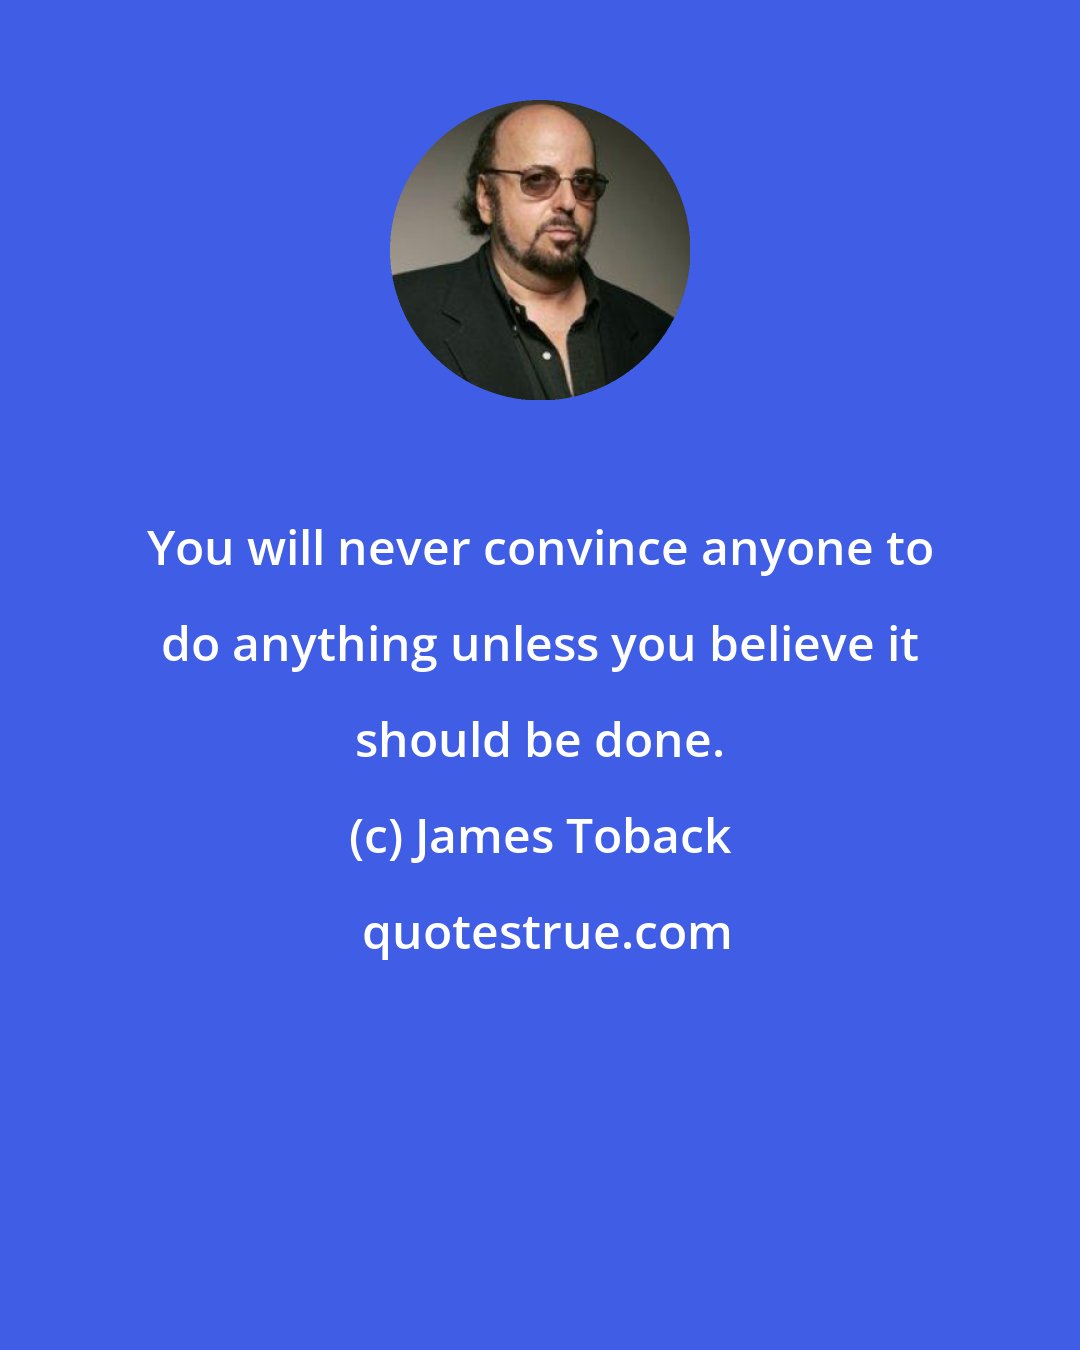 James Toback: You will never convince anyone to do anything unless you believe it should be done.